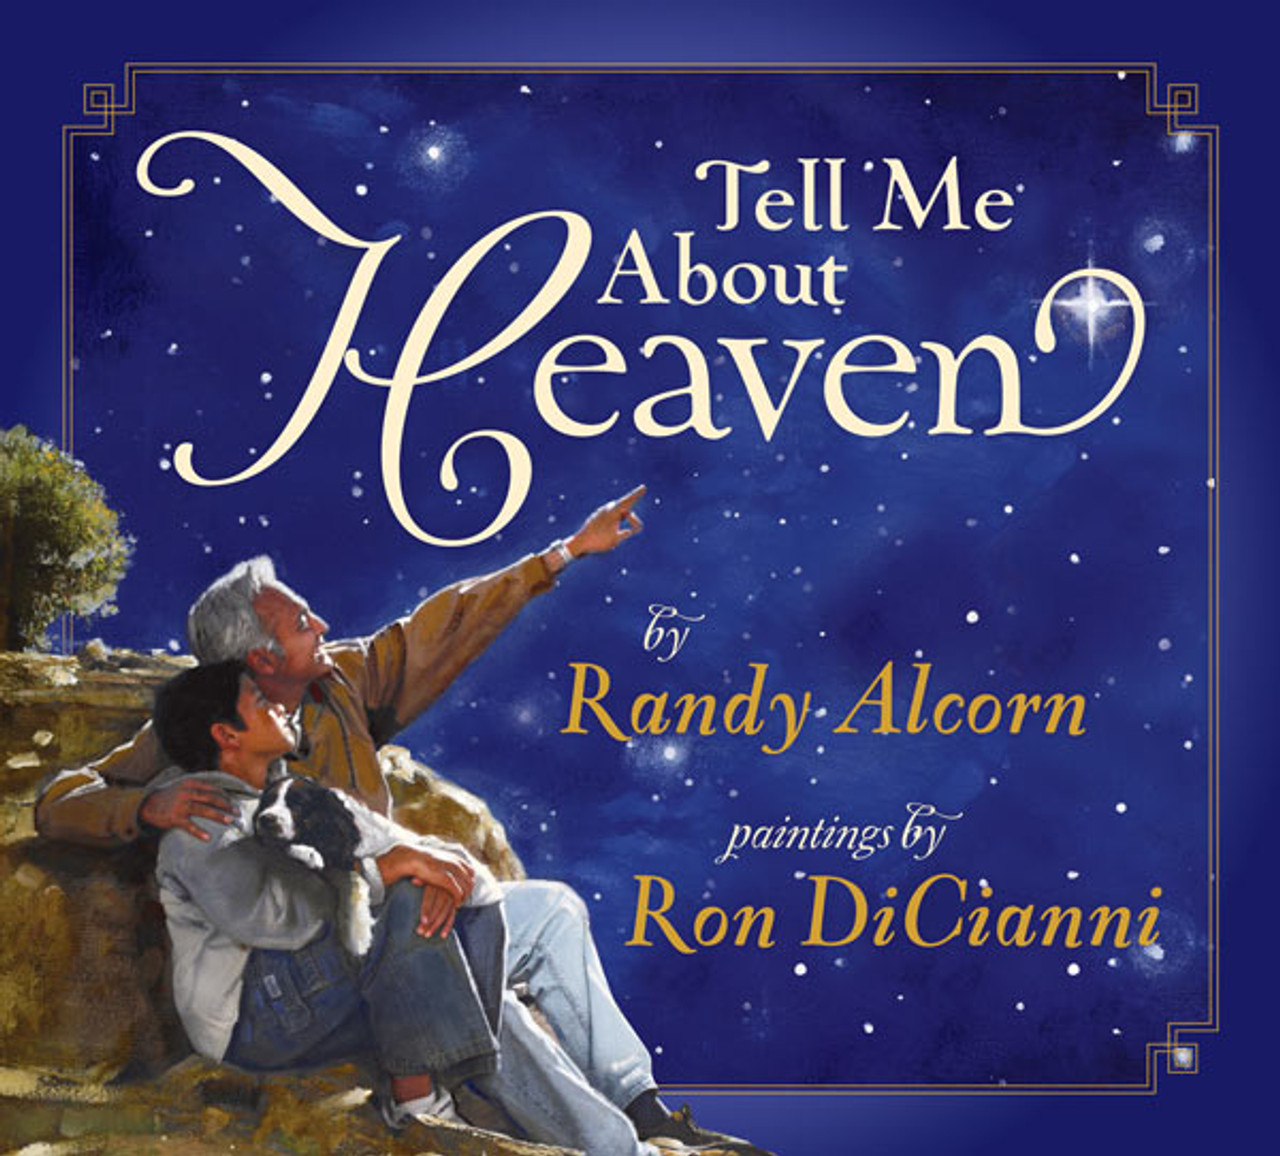 Tell Me About Heaven by Randy Alcorn